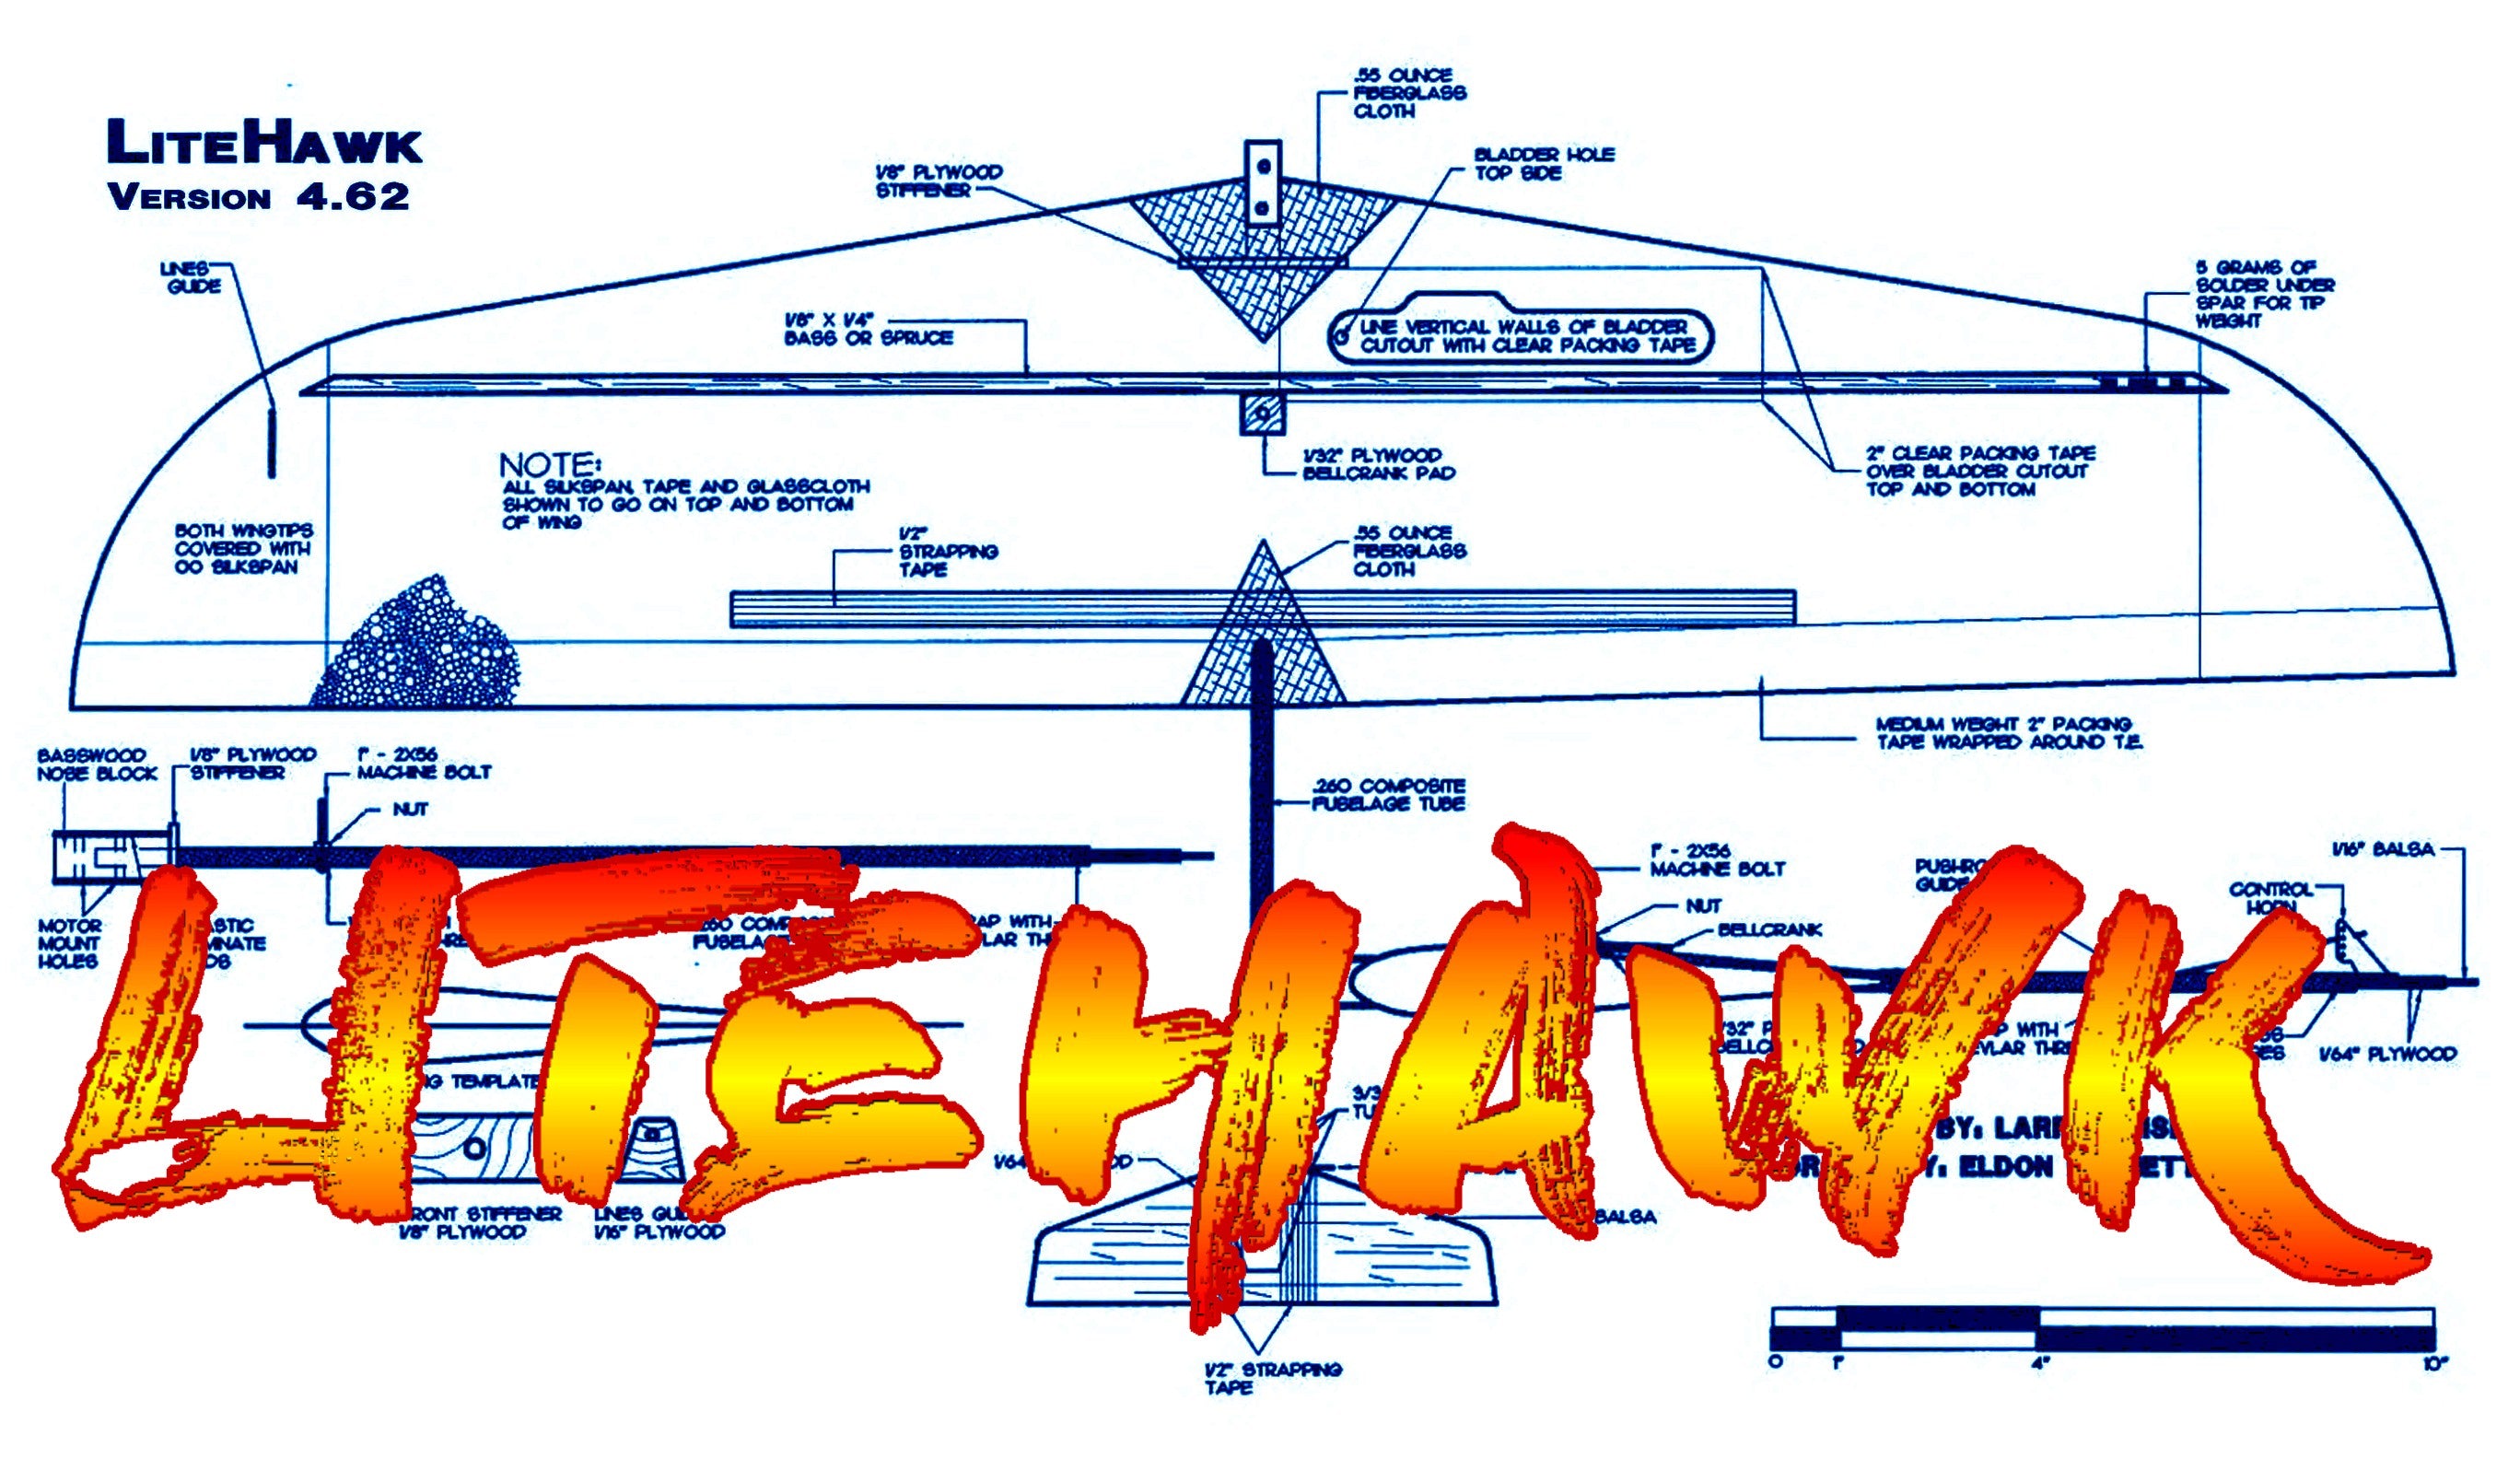 full size printed plan & building notes 1/2a combat *litehawk* w/s 36"  engine 1/2a